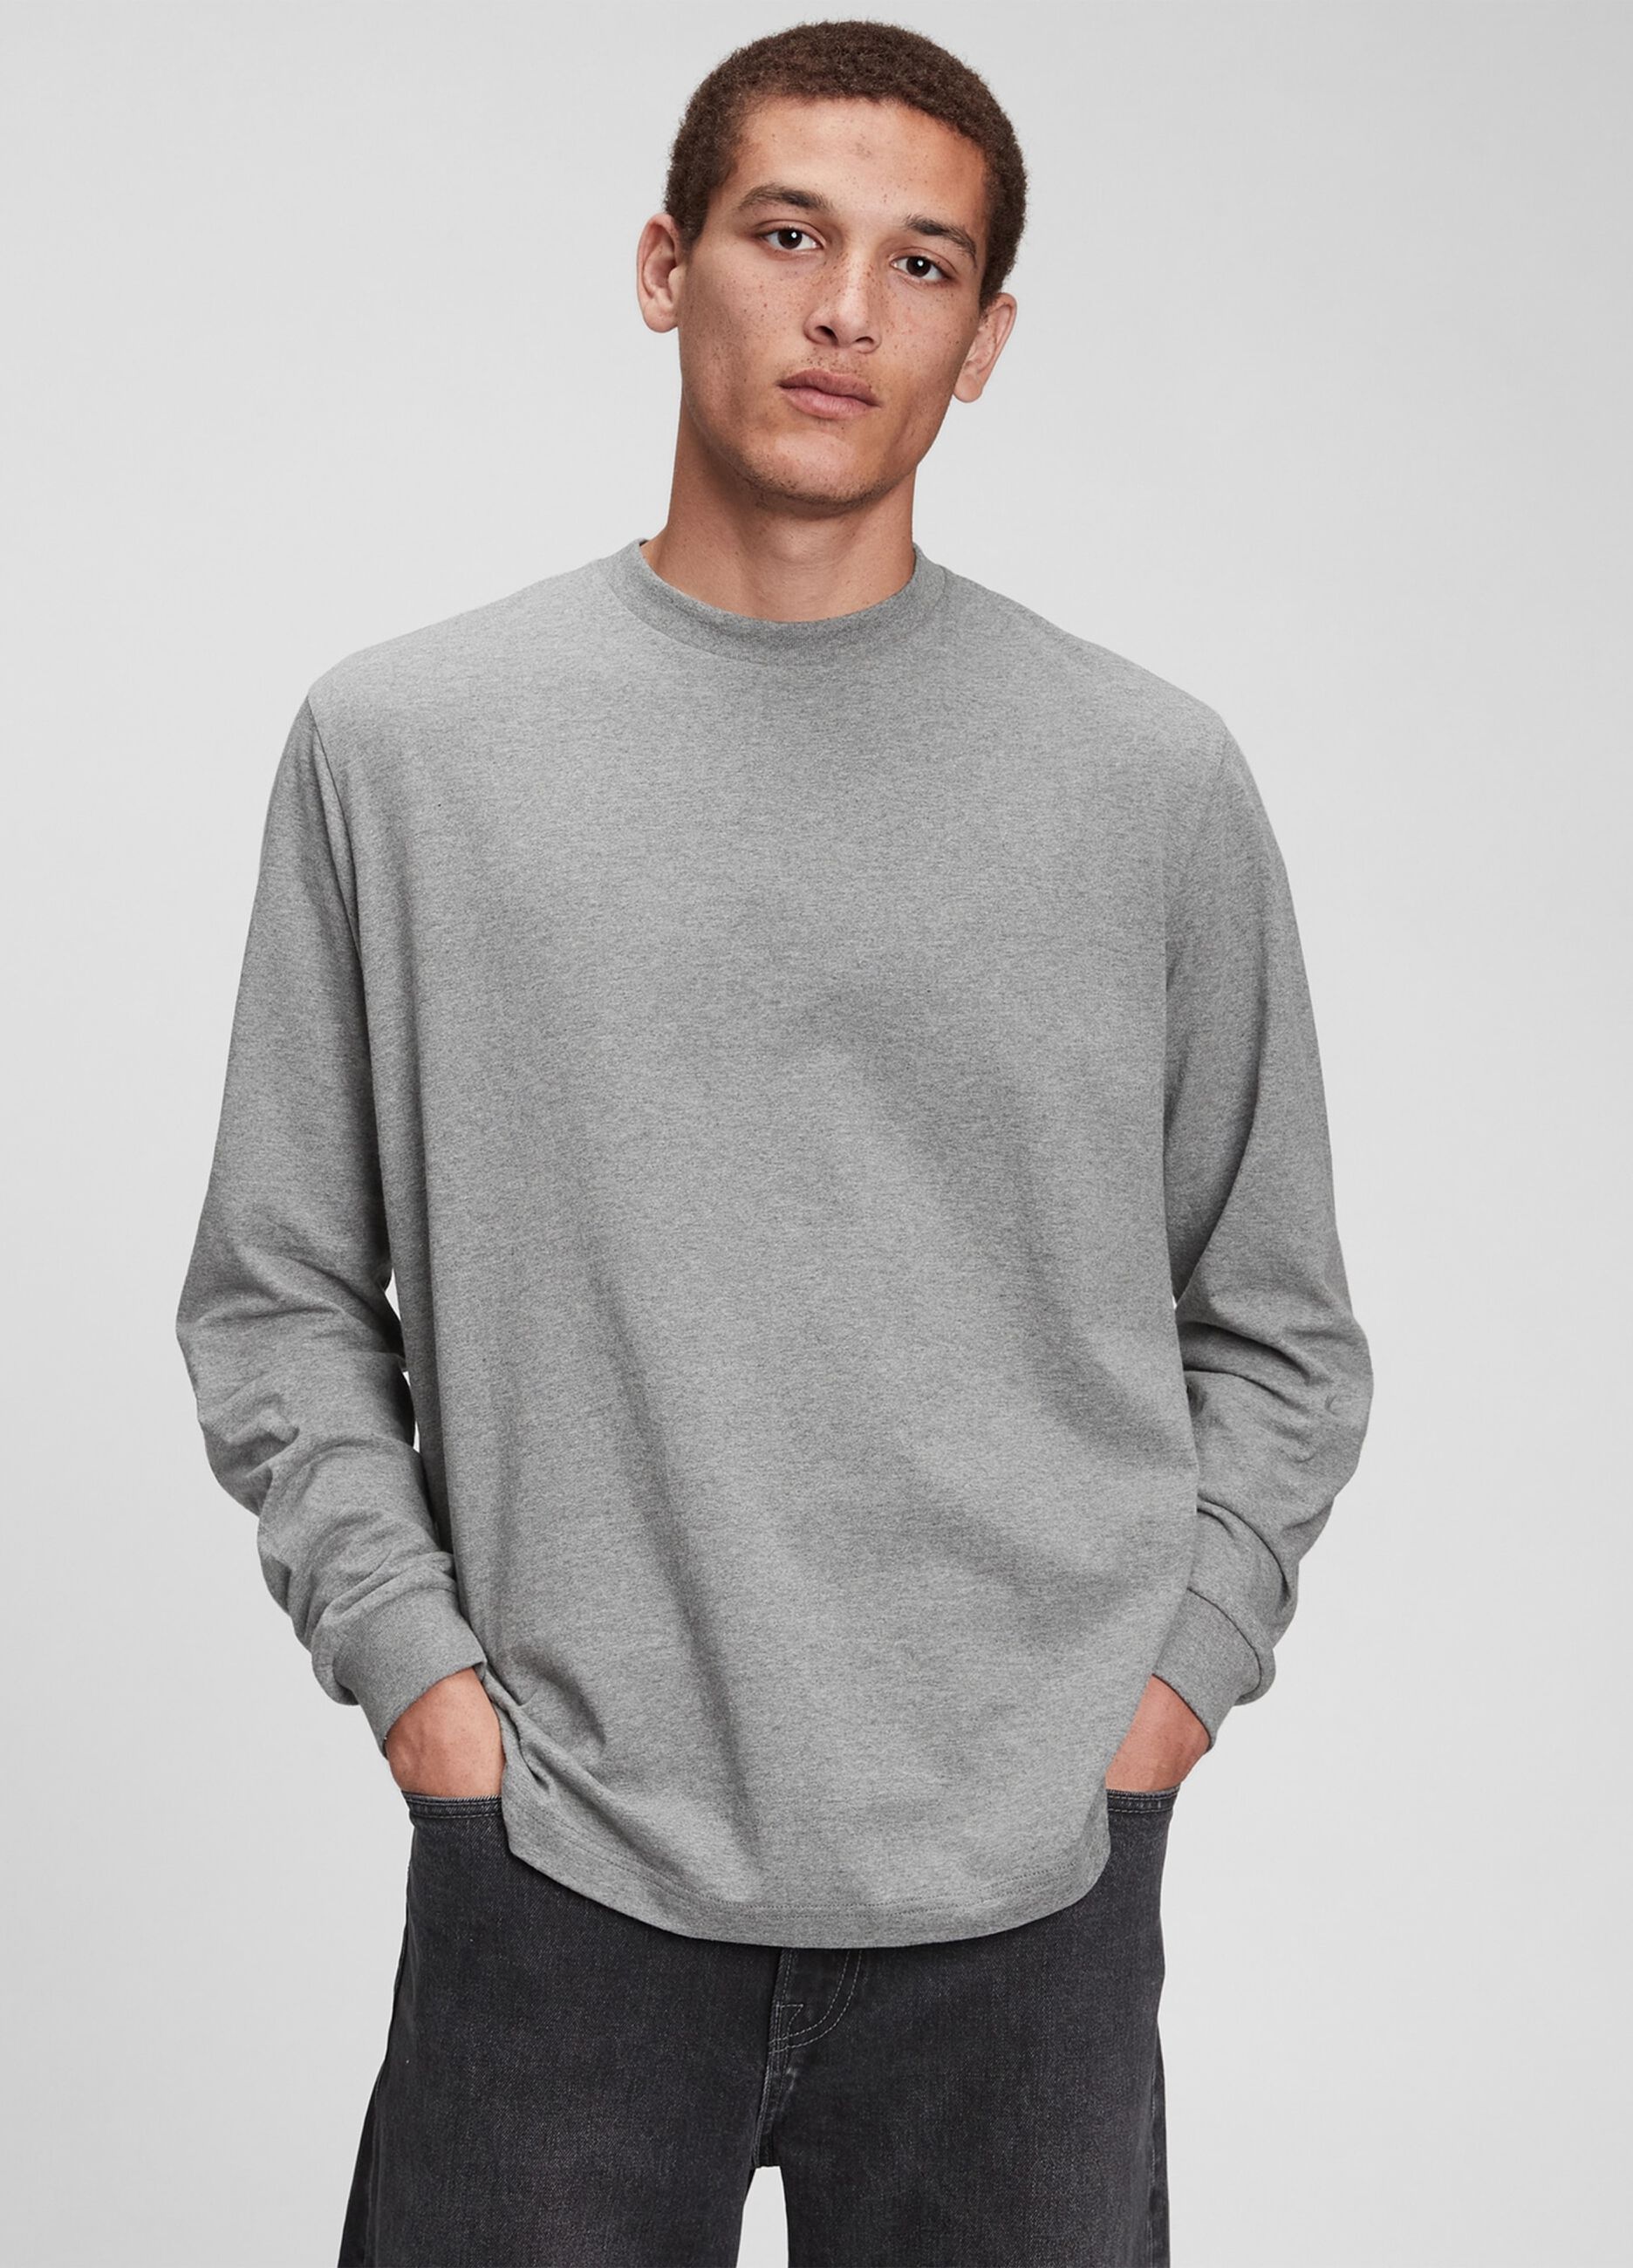 Long-sleeved T-shirt in cotton mélange.